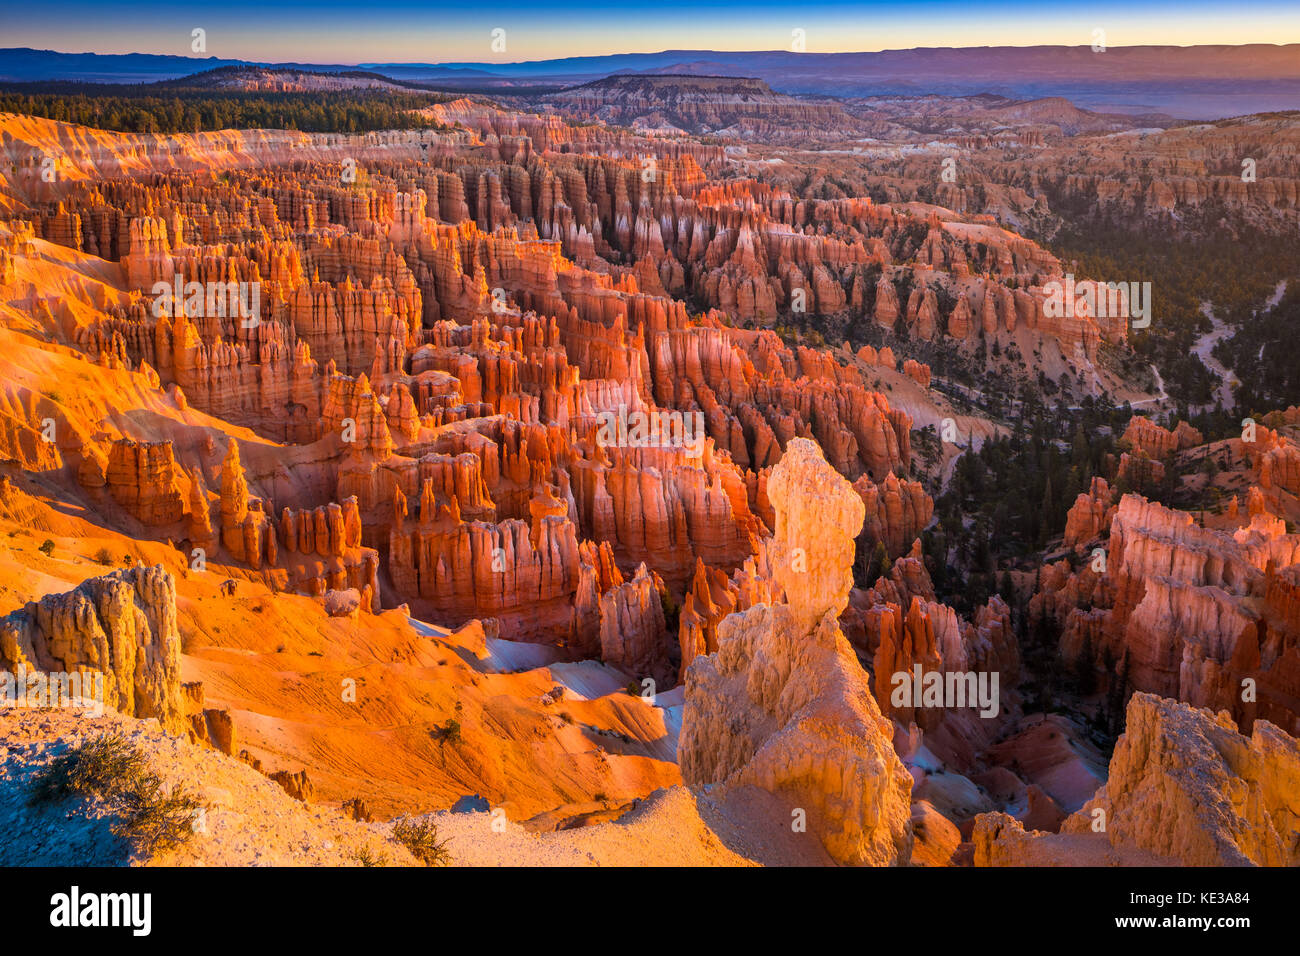 Bryce Canyon National Park, a sprawling reserve in southern Utah, is known for crimson-colored hoodoos, which are spire-shaped rock formations. Stock Photo